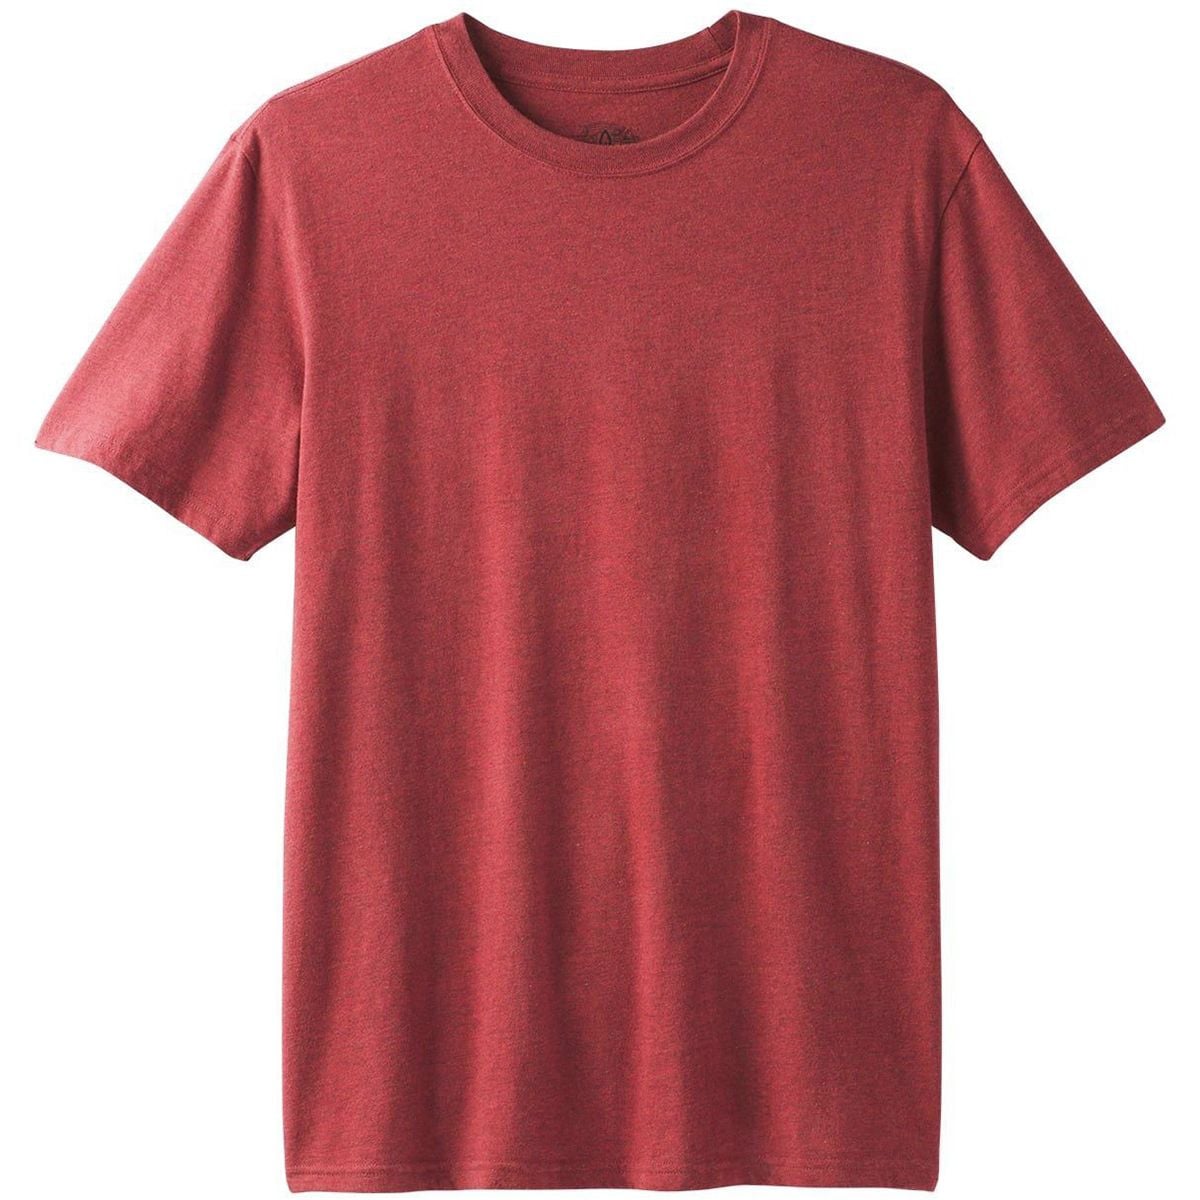 Prana - Men's Classic Casual Styles. Sustainable fashion and apparel.